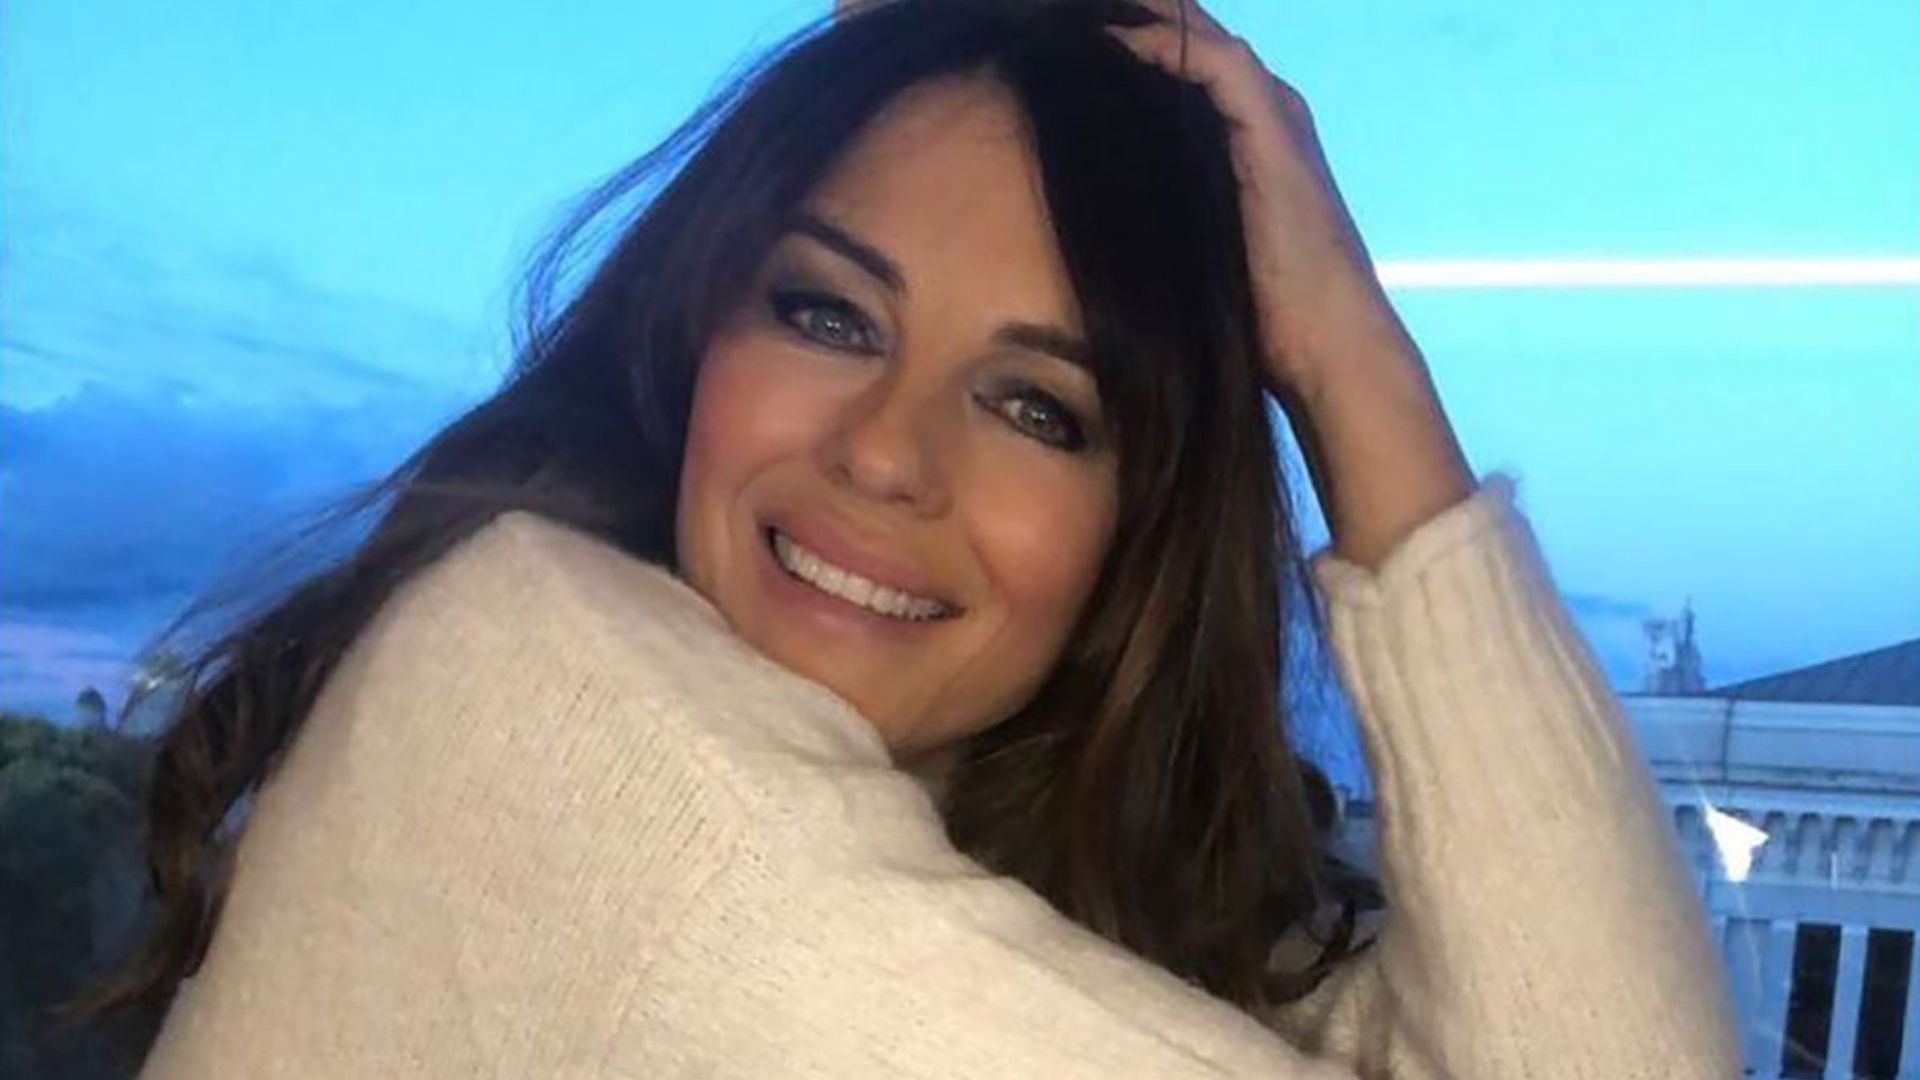 Elizabeth Hurley, 55, poses in just a jumper – and looks stunning